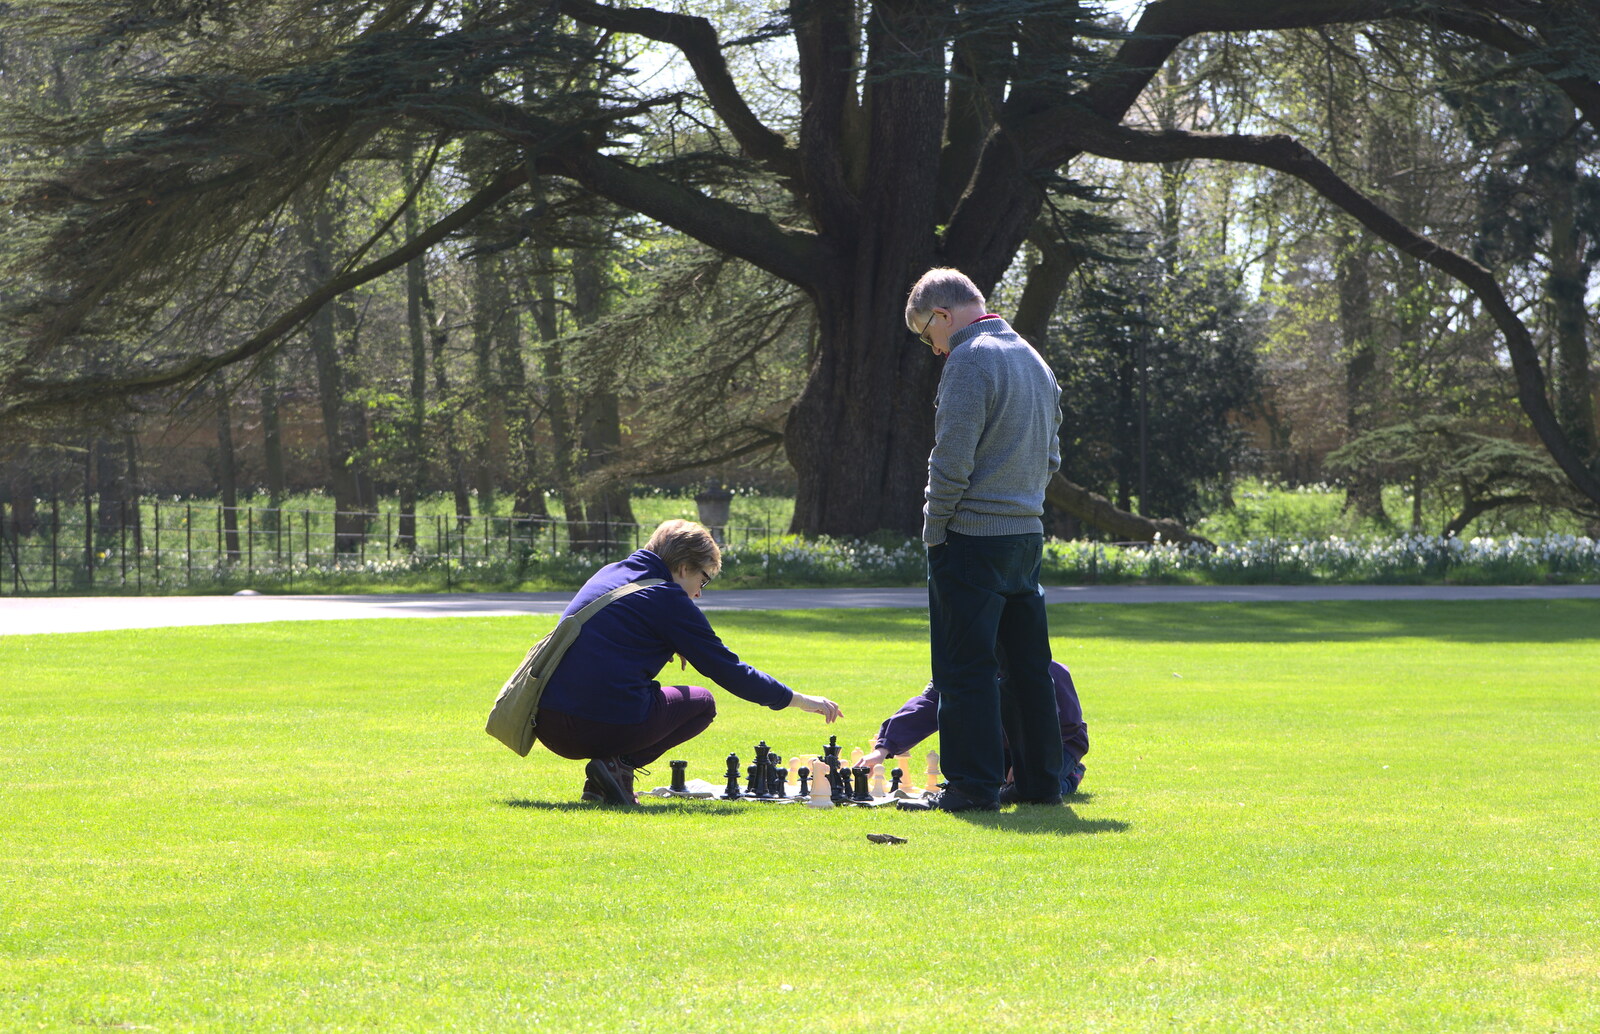 Chess on the lawn from A Trip to Audley End House, Saffron Walden, Essex - 16th April 2014